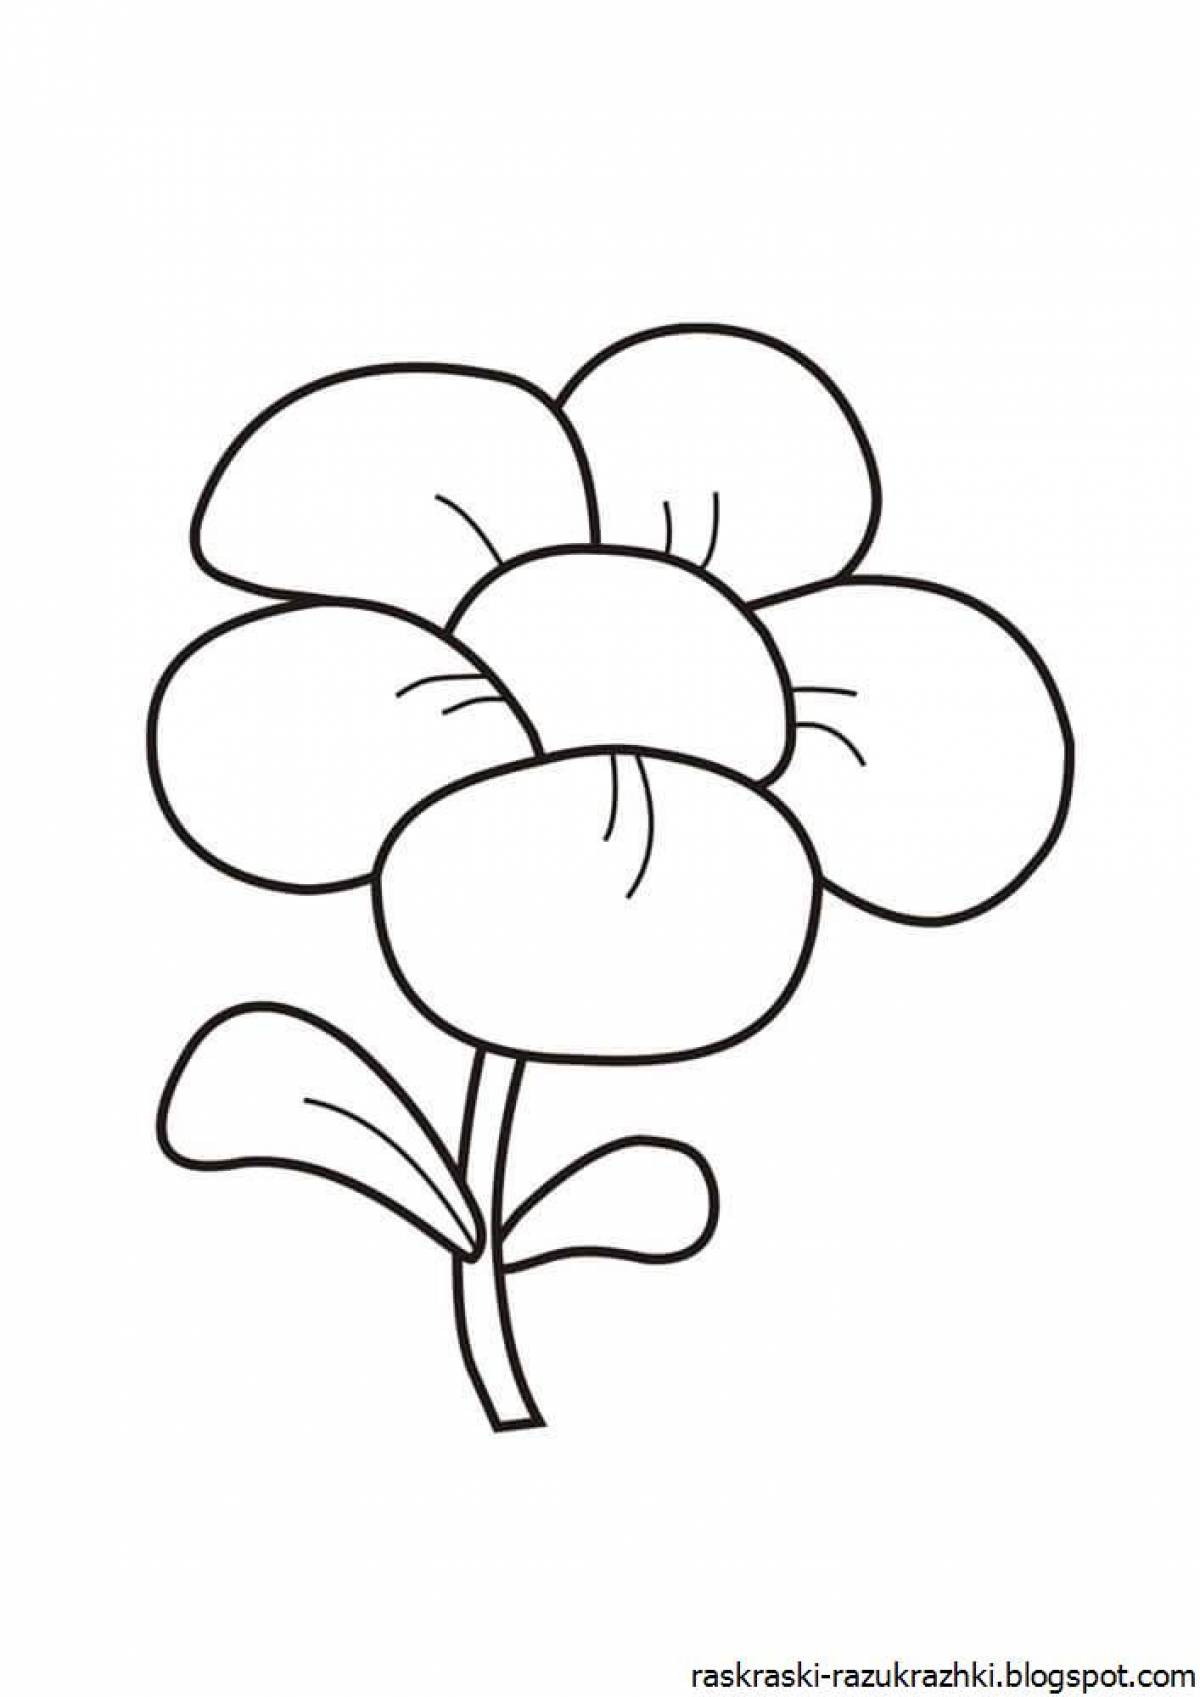 Wonderful flower coloring book for kids